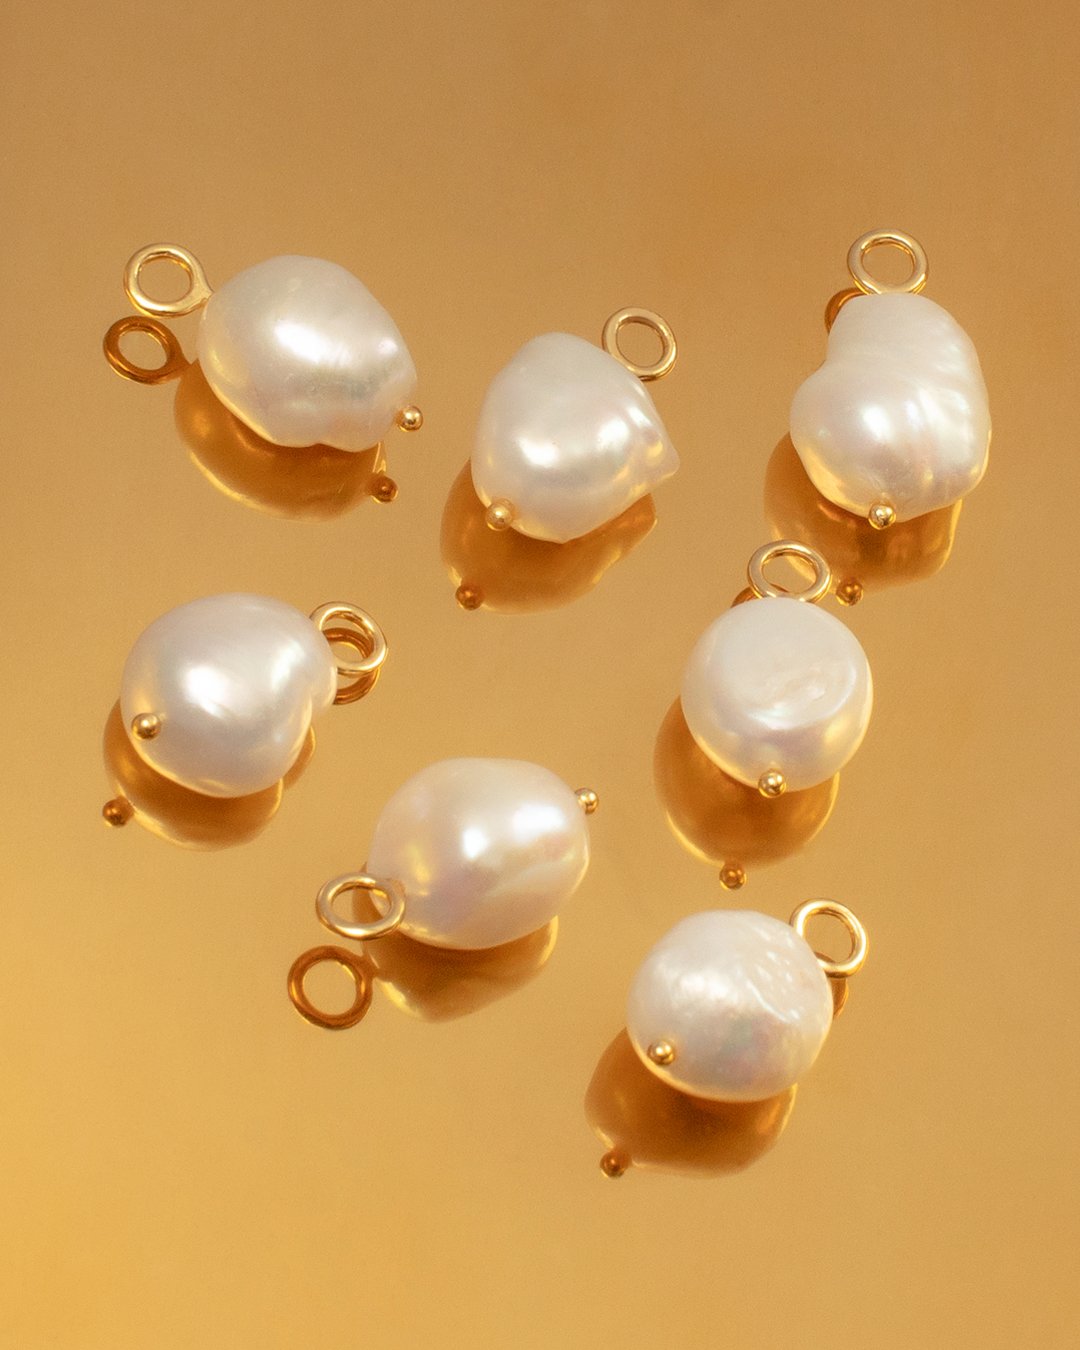 Pearl Jewellery For Women | Natural Pearl Necklaces & Earrings